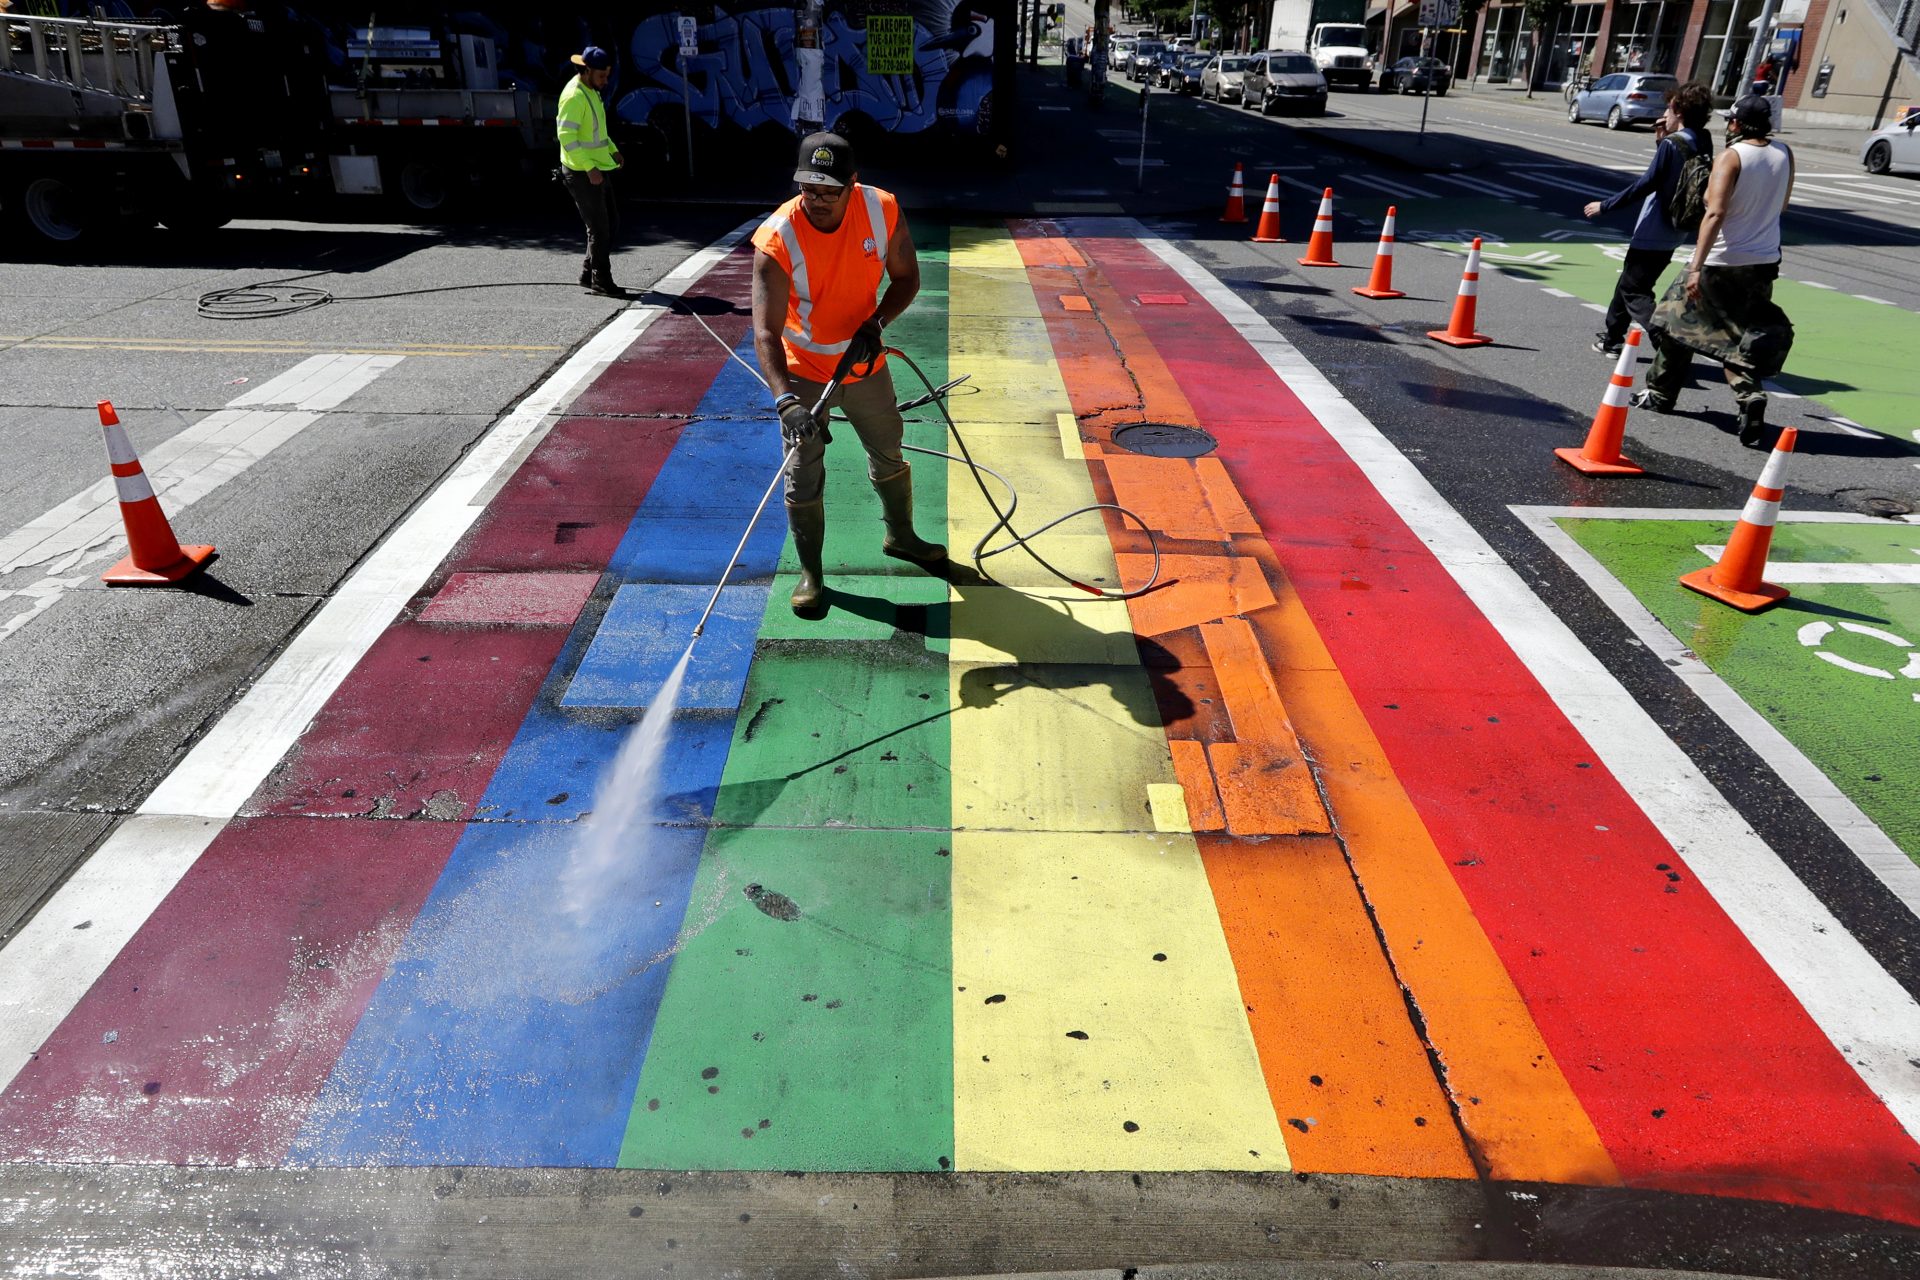 City worker Terrance Bryant pressure washes a rainbow-painted crosswalk in an annual clean-up ahead of Pride weekend Tuesday, June 23, 2020, in Seattle. The usual LGBTQ Pride weekend of events is being replaced with virtual events beginning Friday, June 26, with speakers, music and other online activities.